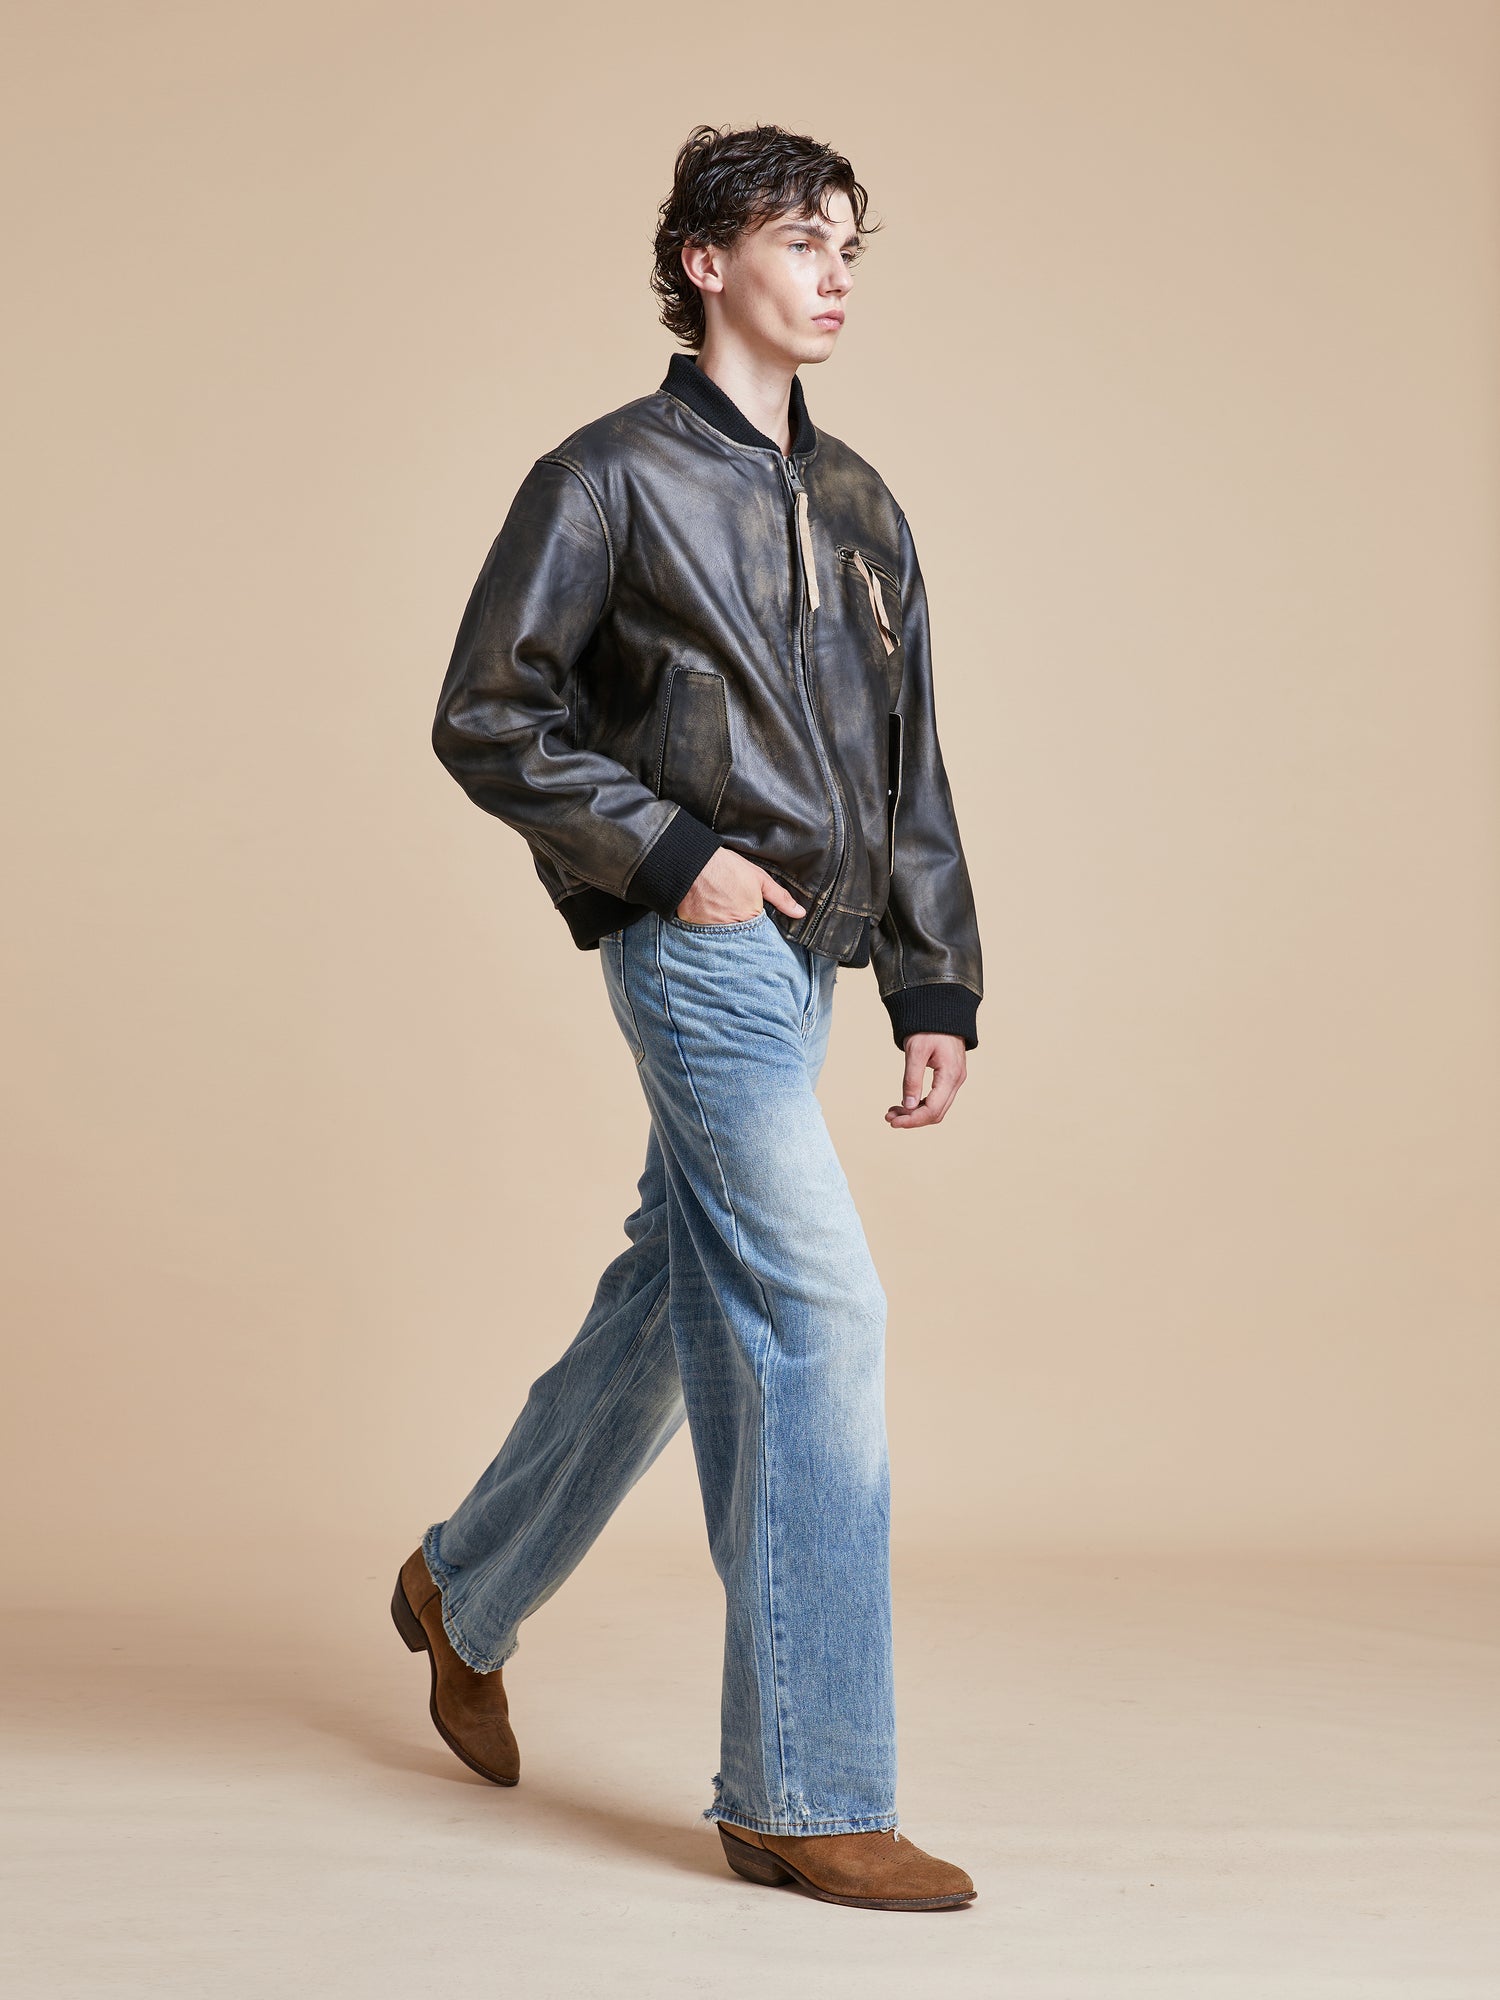 A man in a Distressed Pavement Leather Bomber Jacket by Found and jeans walking on a beige background.